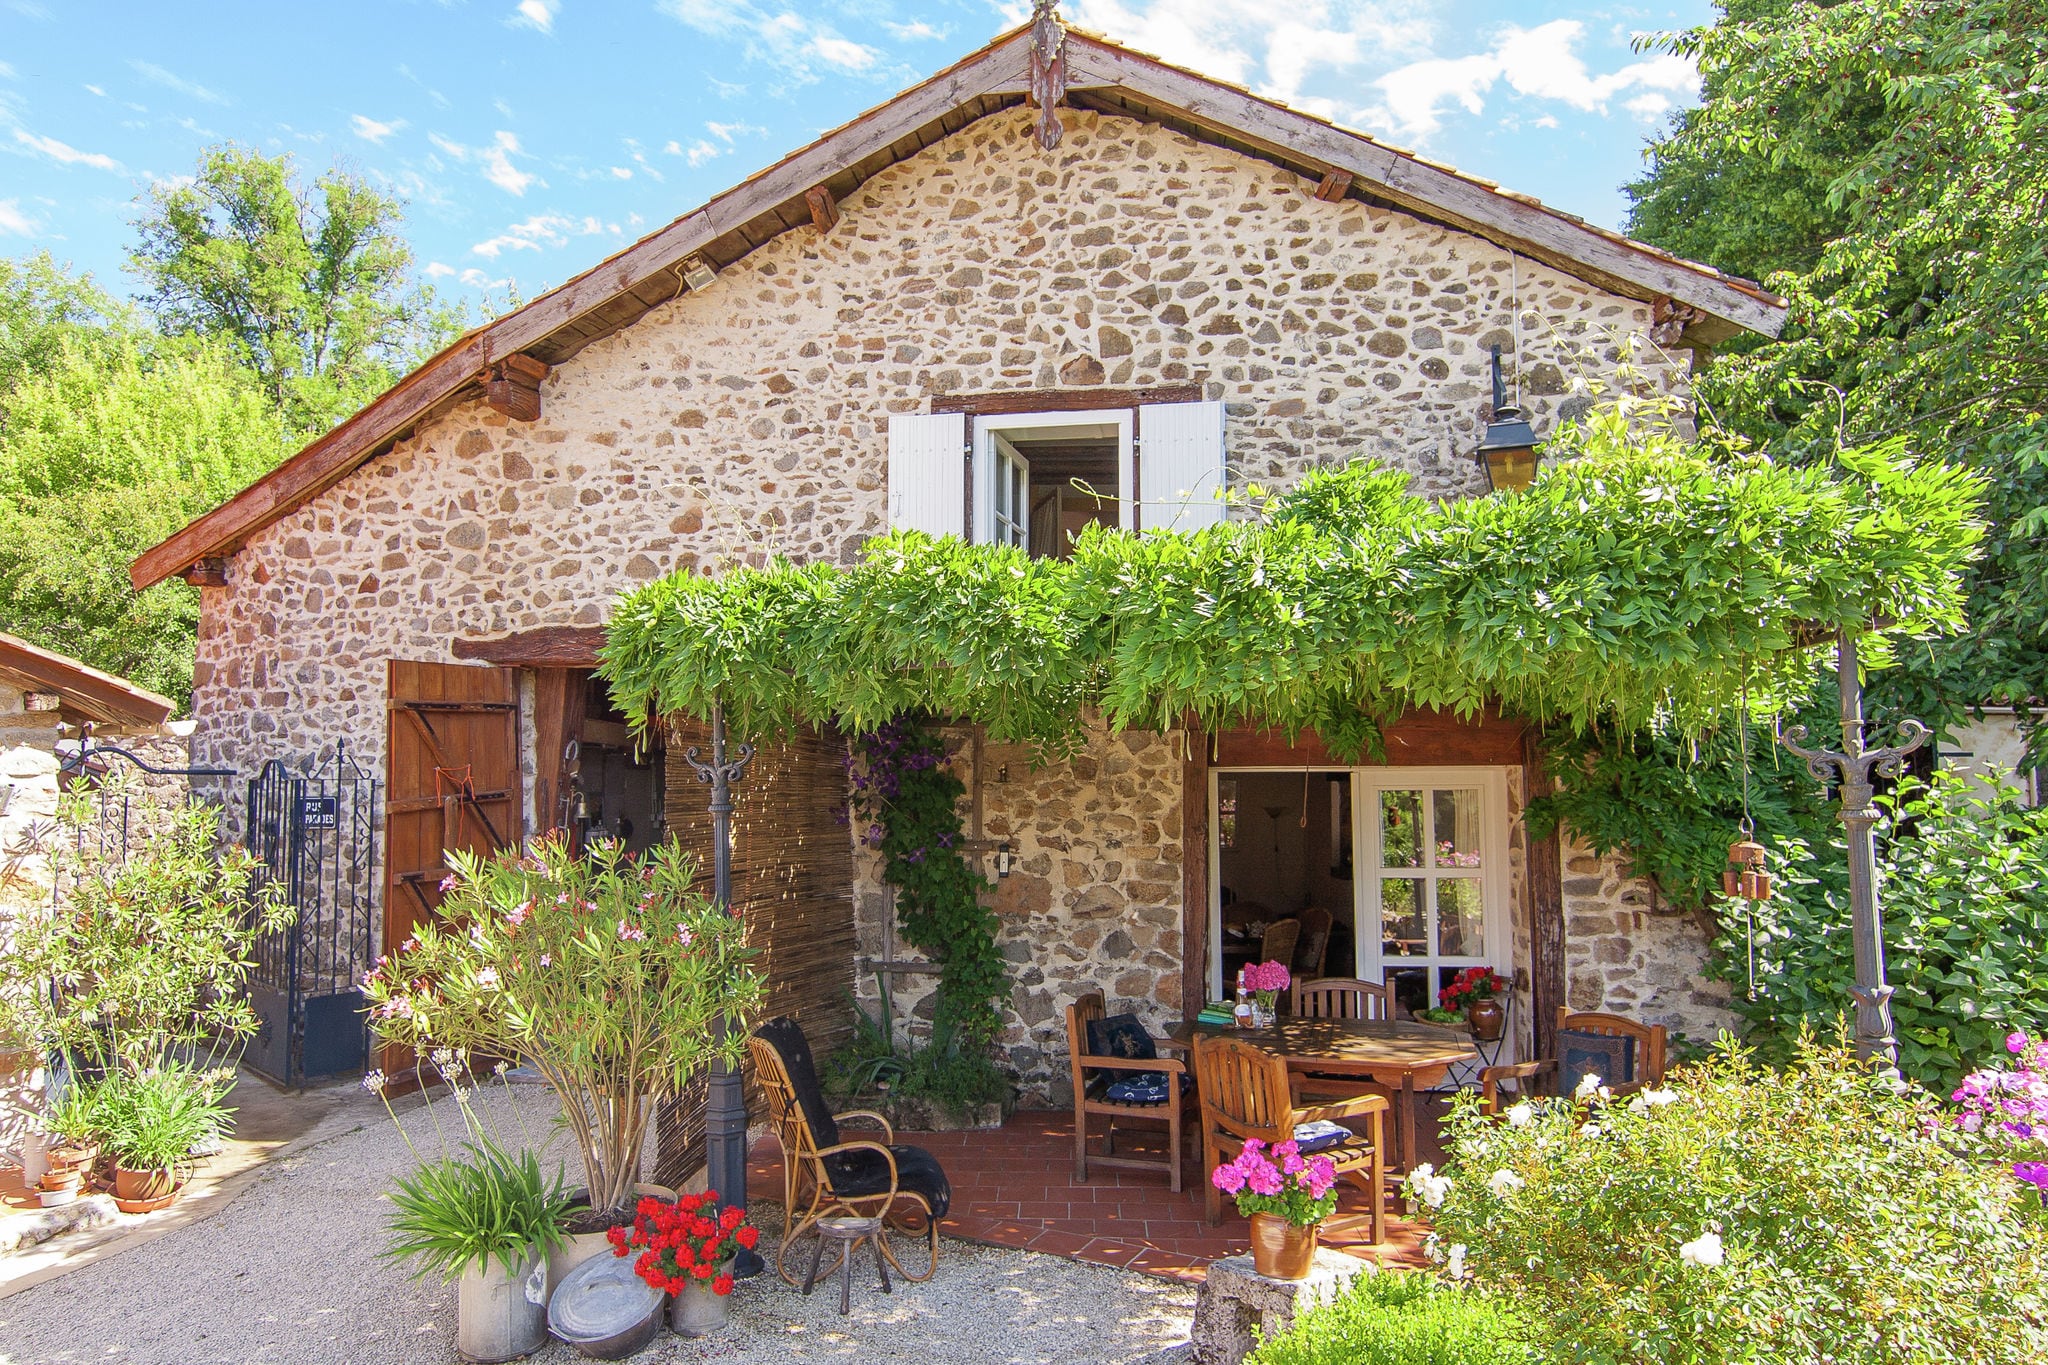 Detached, romantic cottage with communal swimming pool, terraces and large garden